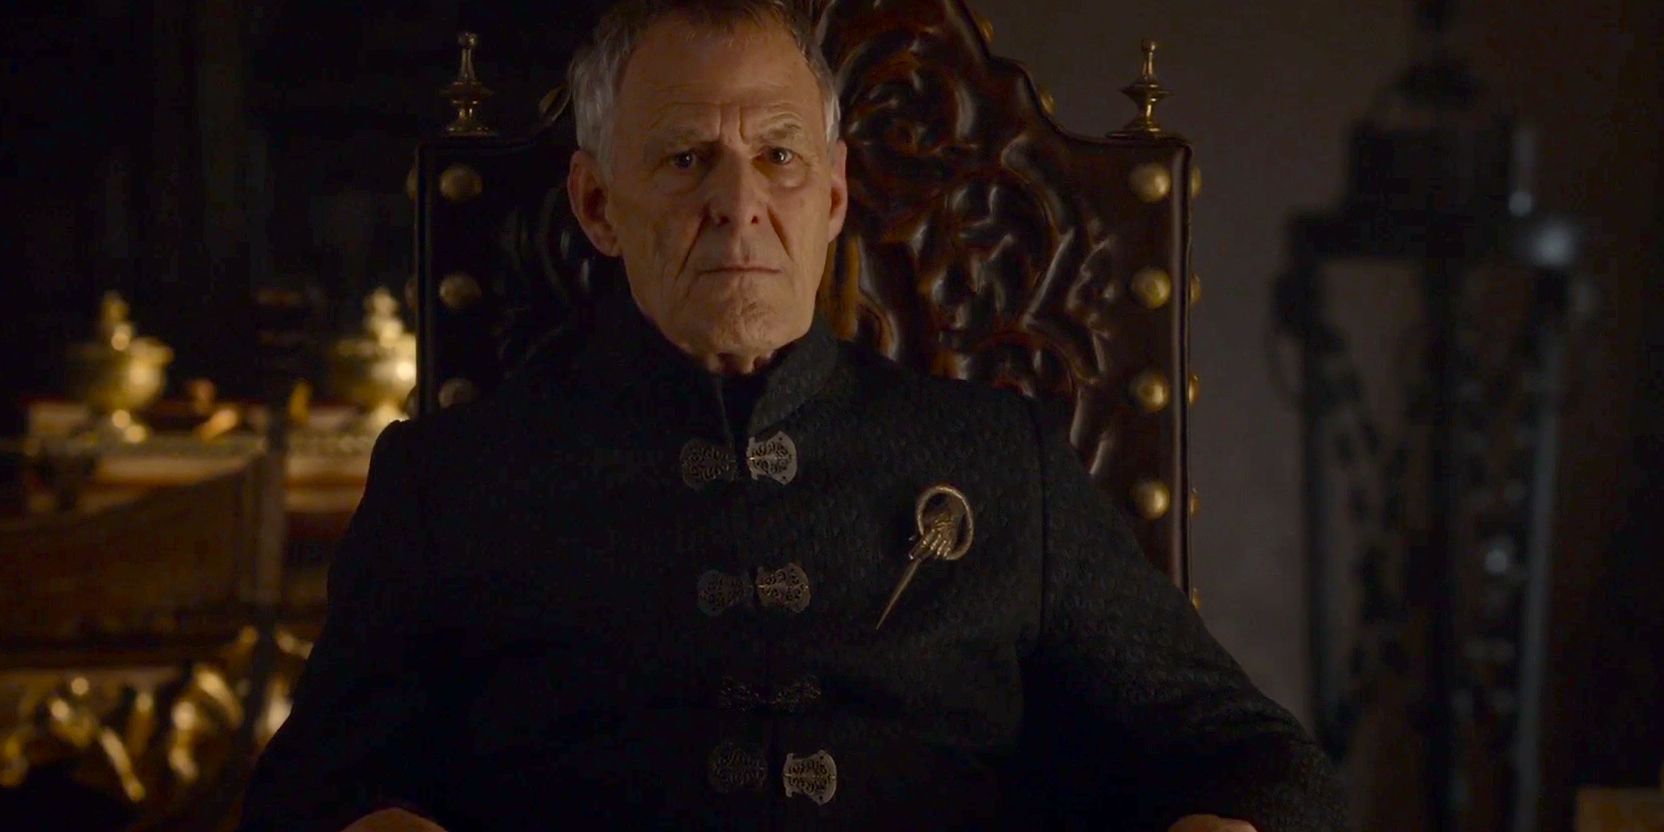 Kevan Lannister sitting in a chair in Game of Thrones